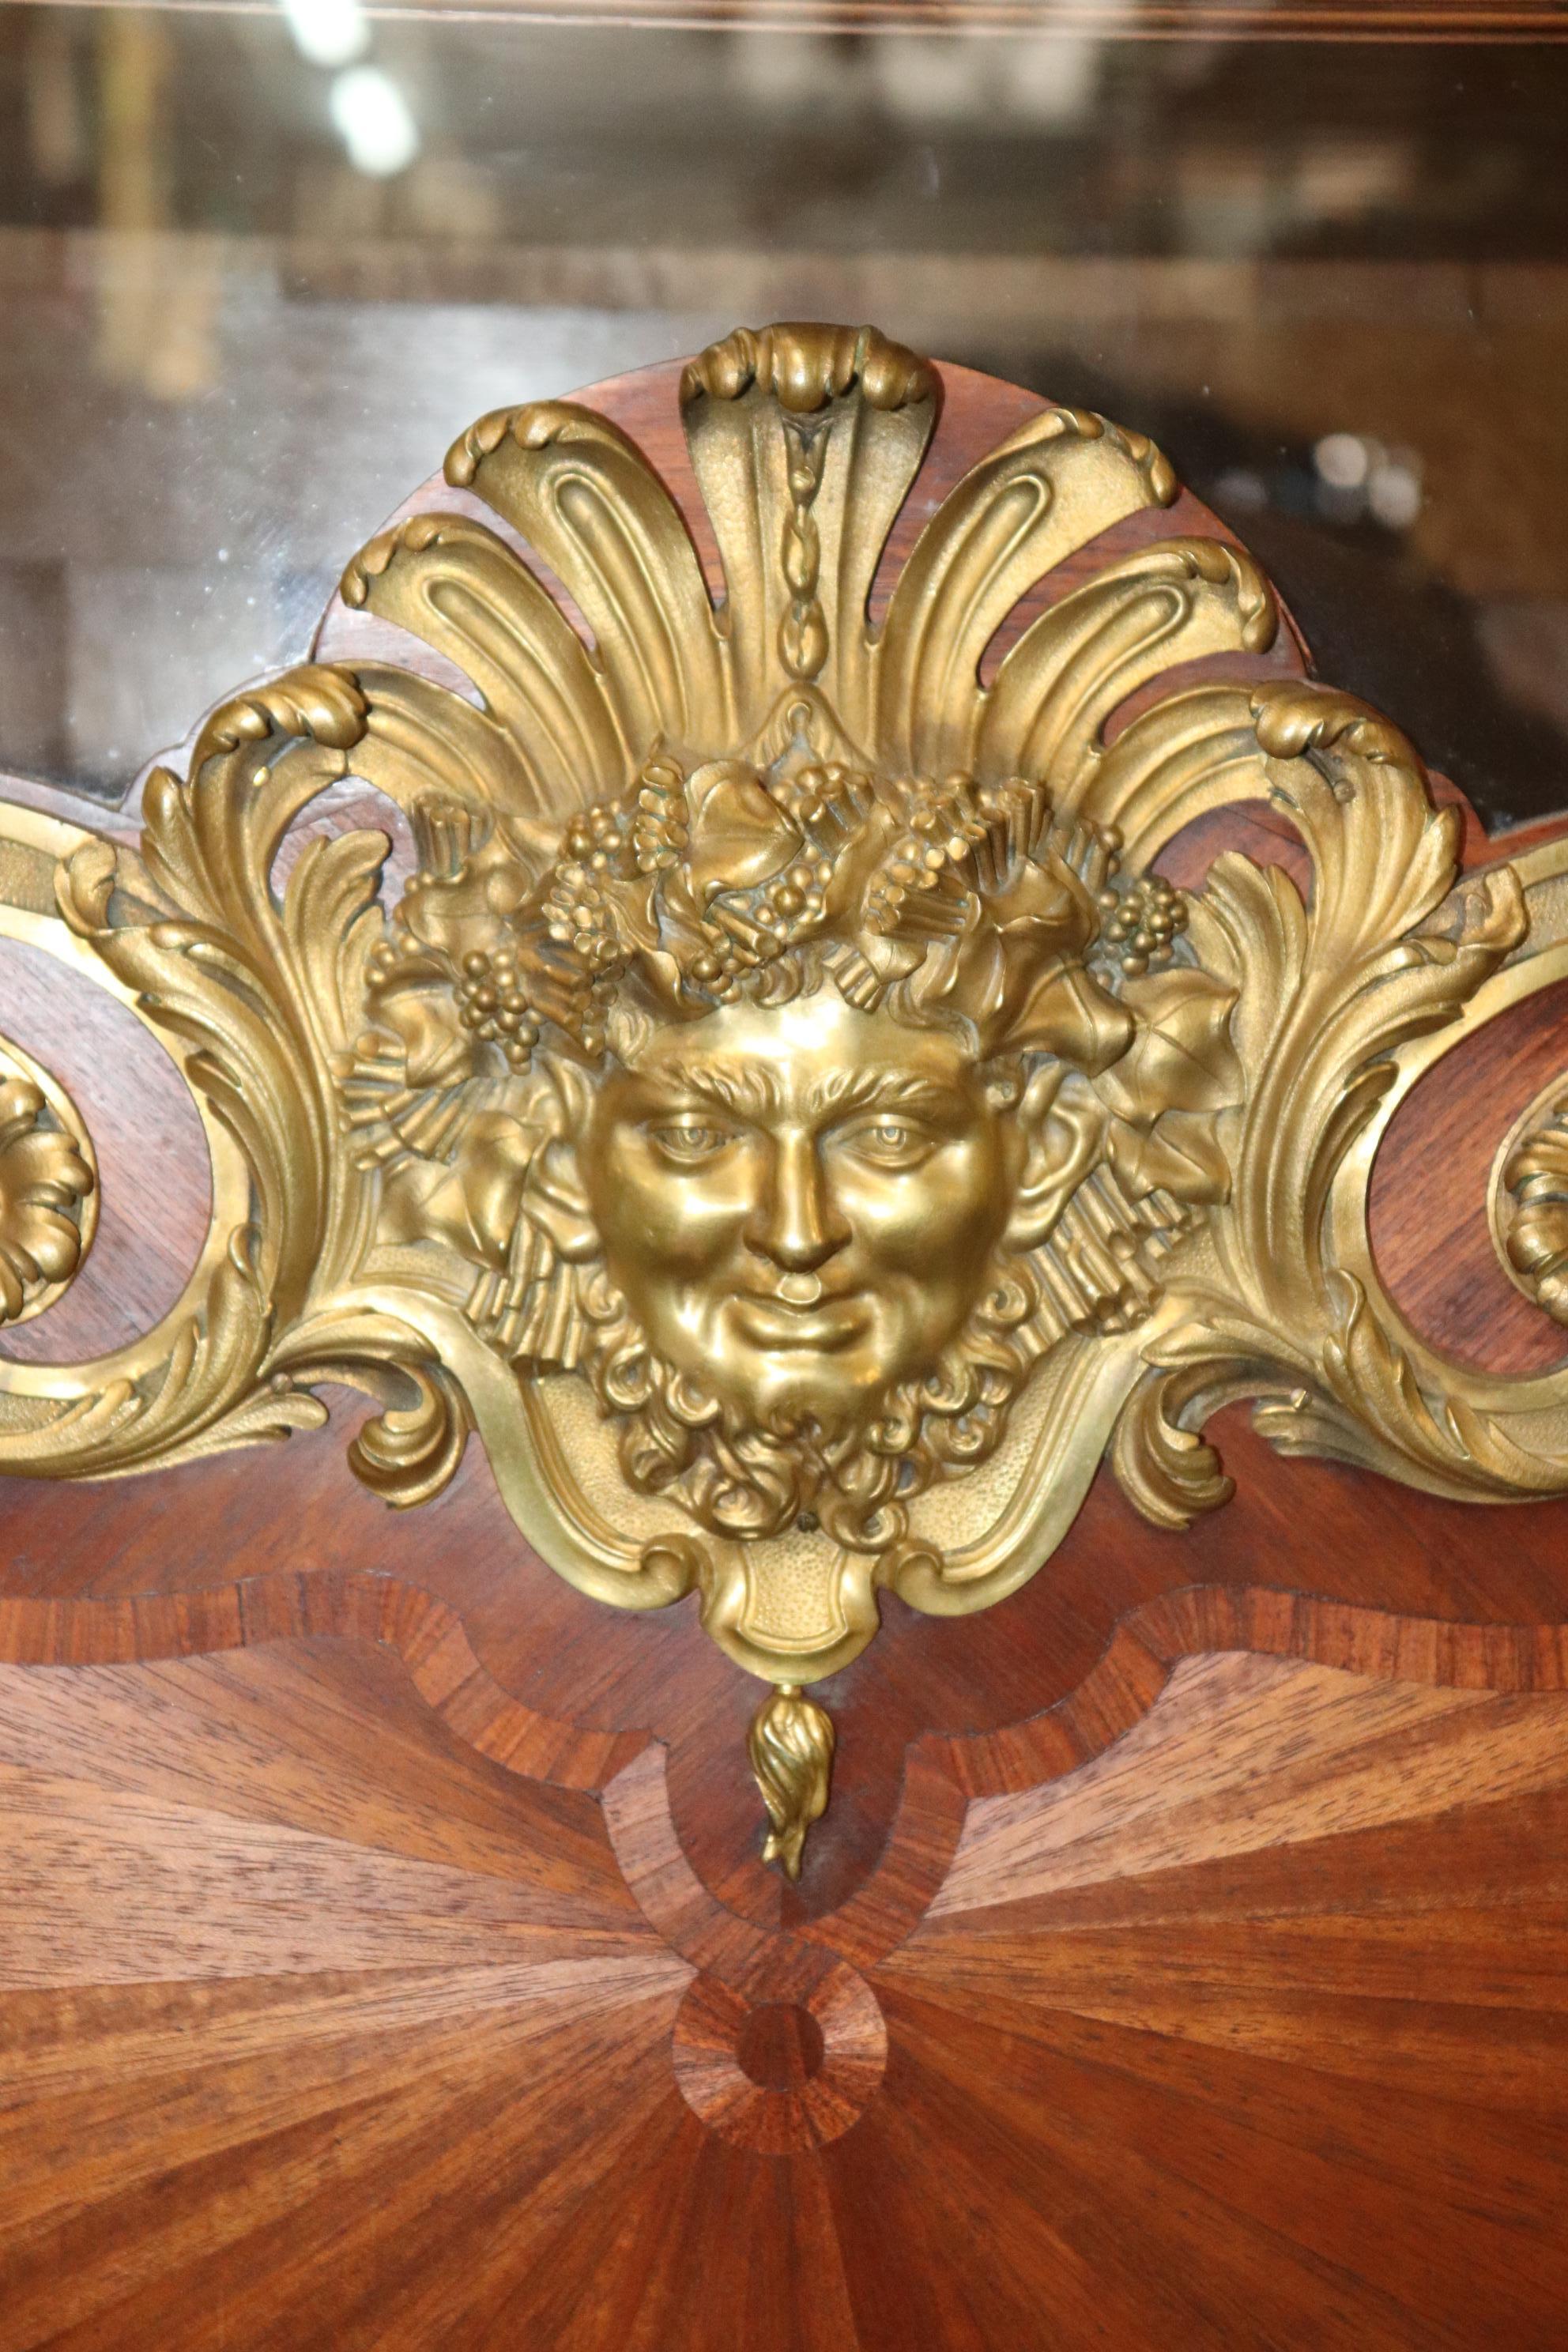 This is an incredibly rare signed Paul Sormani of Paris Vitrine for displaying silver and china in a grand dining room area. This piece features a fantastic bronze face mask and incredible reticulated bronze ormolu surmounted the piece with